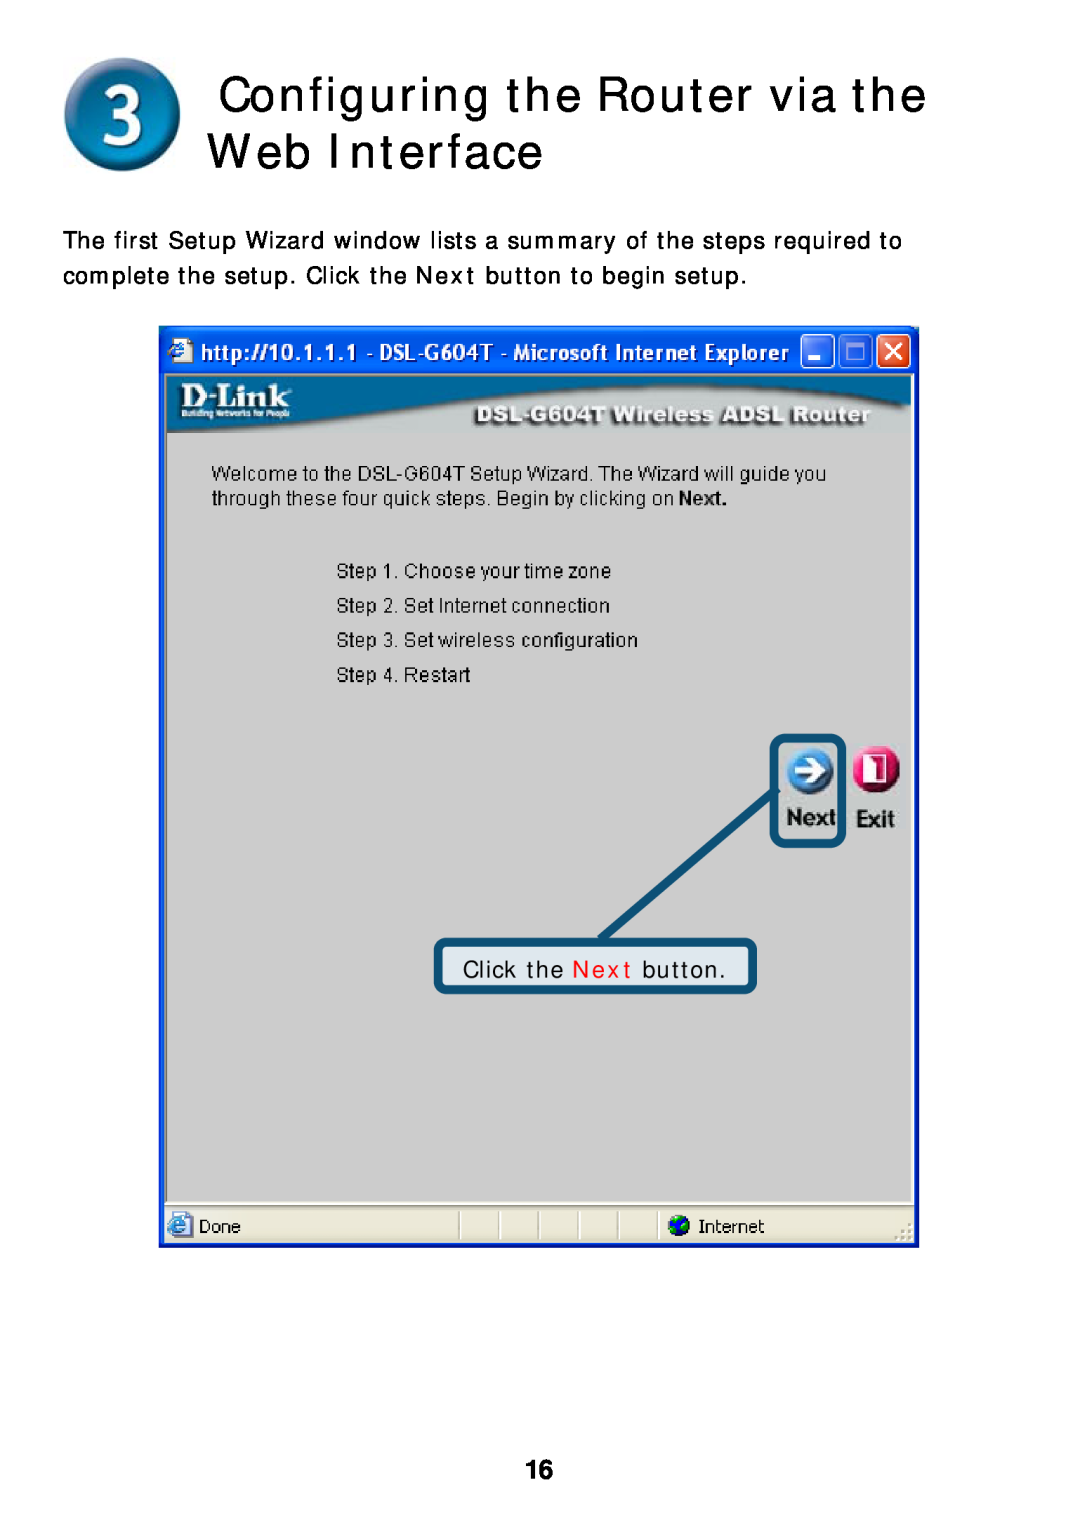 D-Link DSL-G604T specifications Configuring the Router via the Web Interface, Click the Next button 